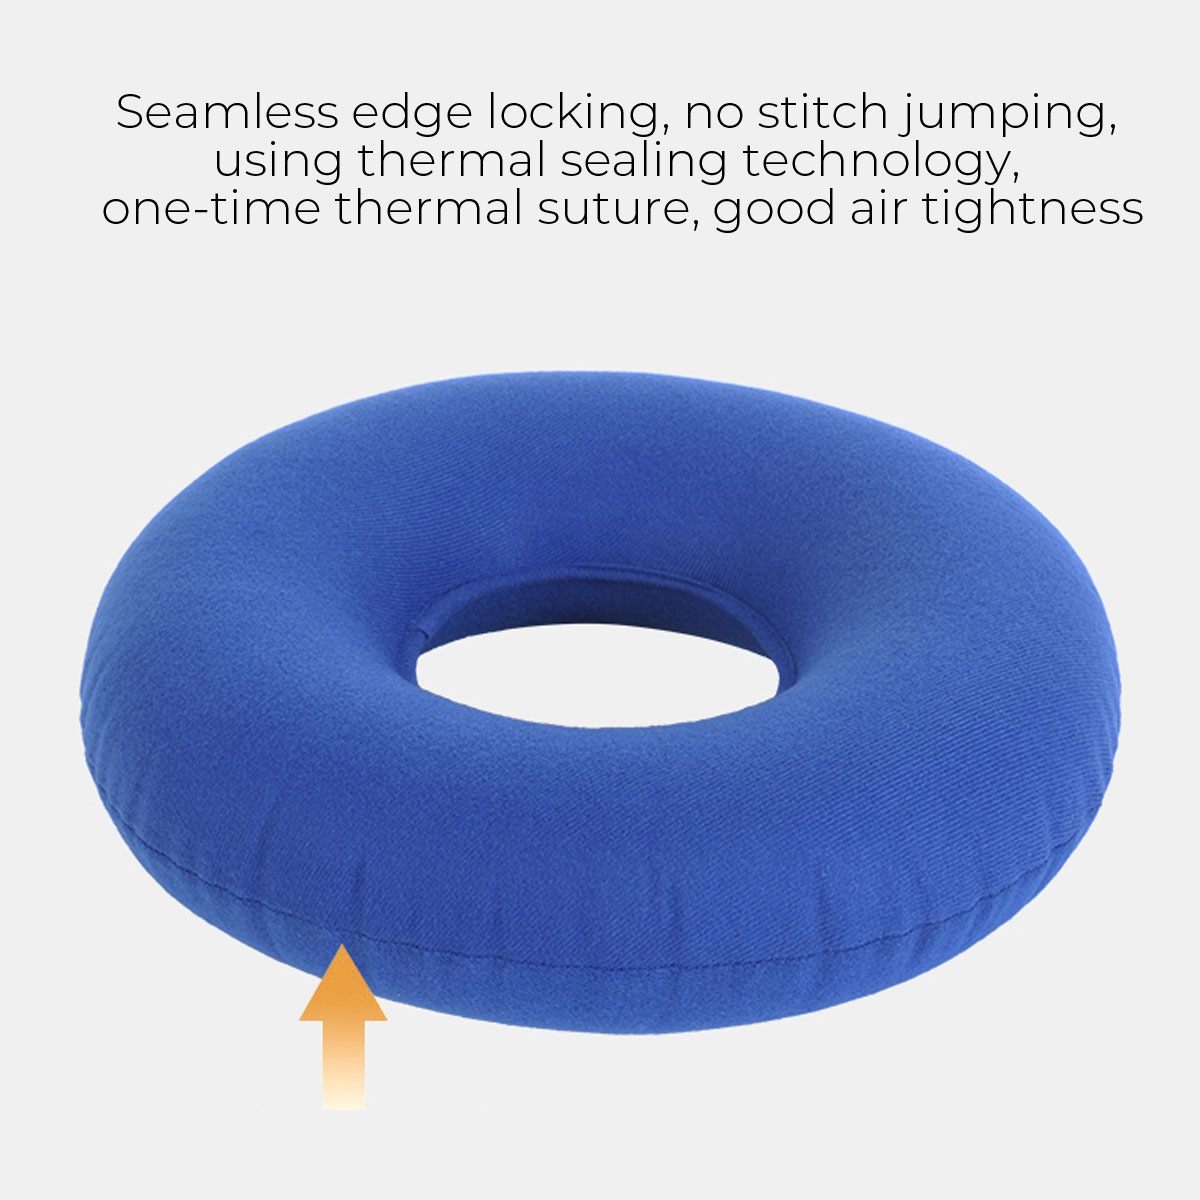 36x13CM-Round-Inflatable-Cushion-Seat-Pad-Massage-Cushion-Mat-Hemorrhoid-Pillow-With-Pump-for-Office-1811922-3